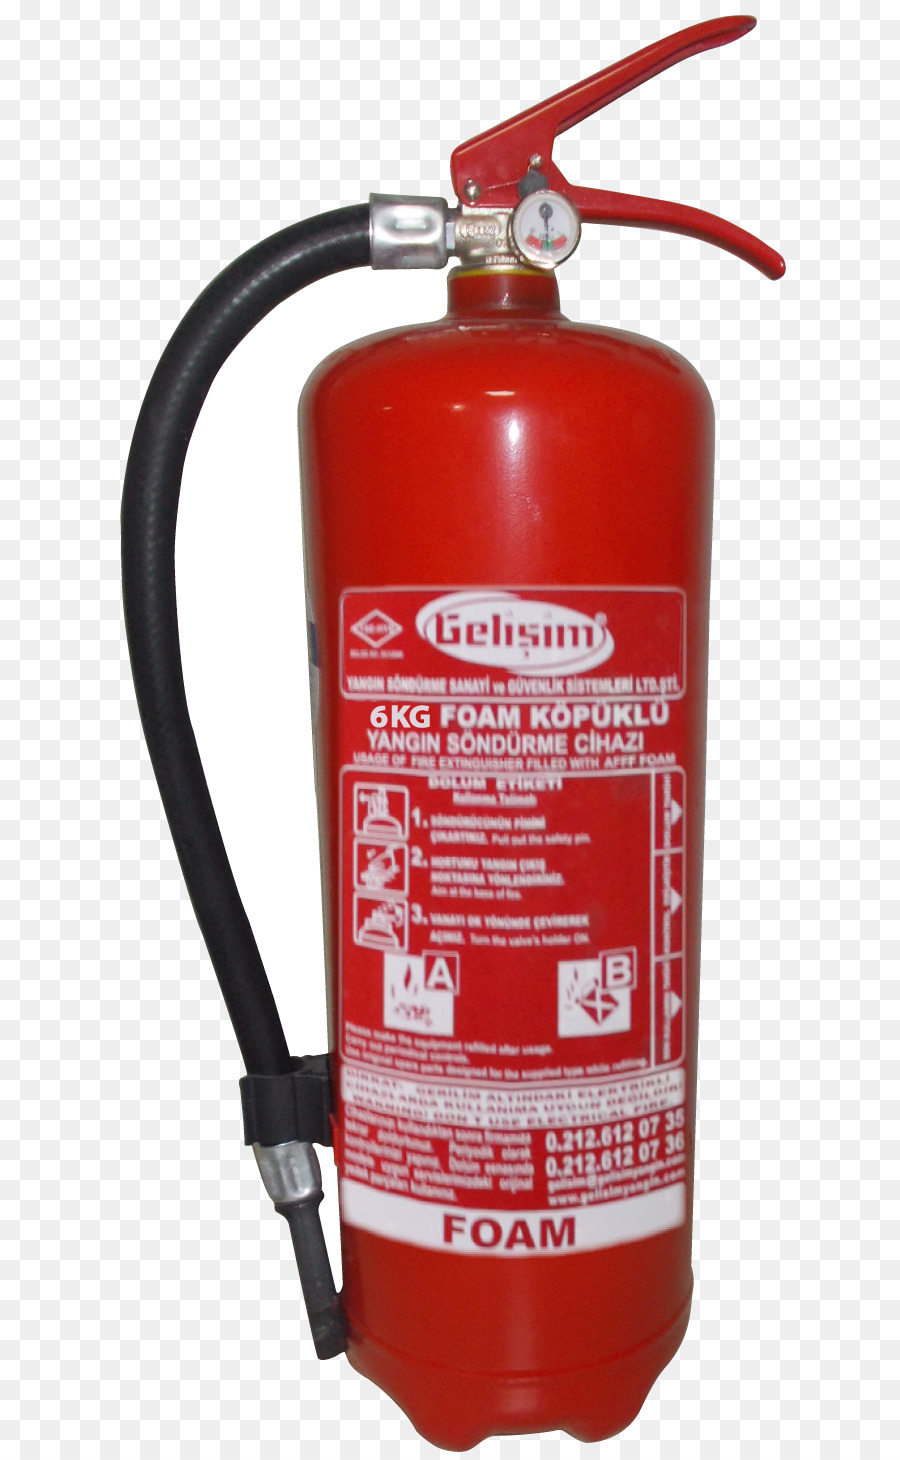 Fire Extinguisher Clipart